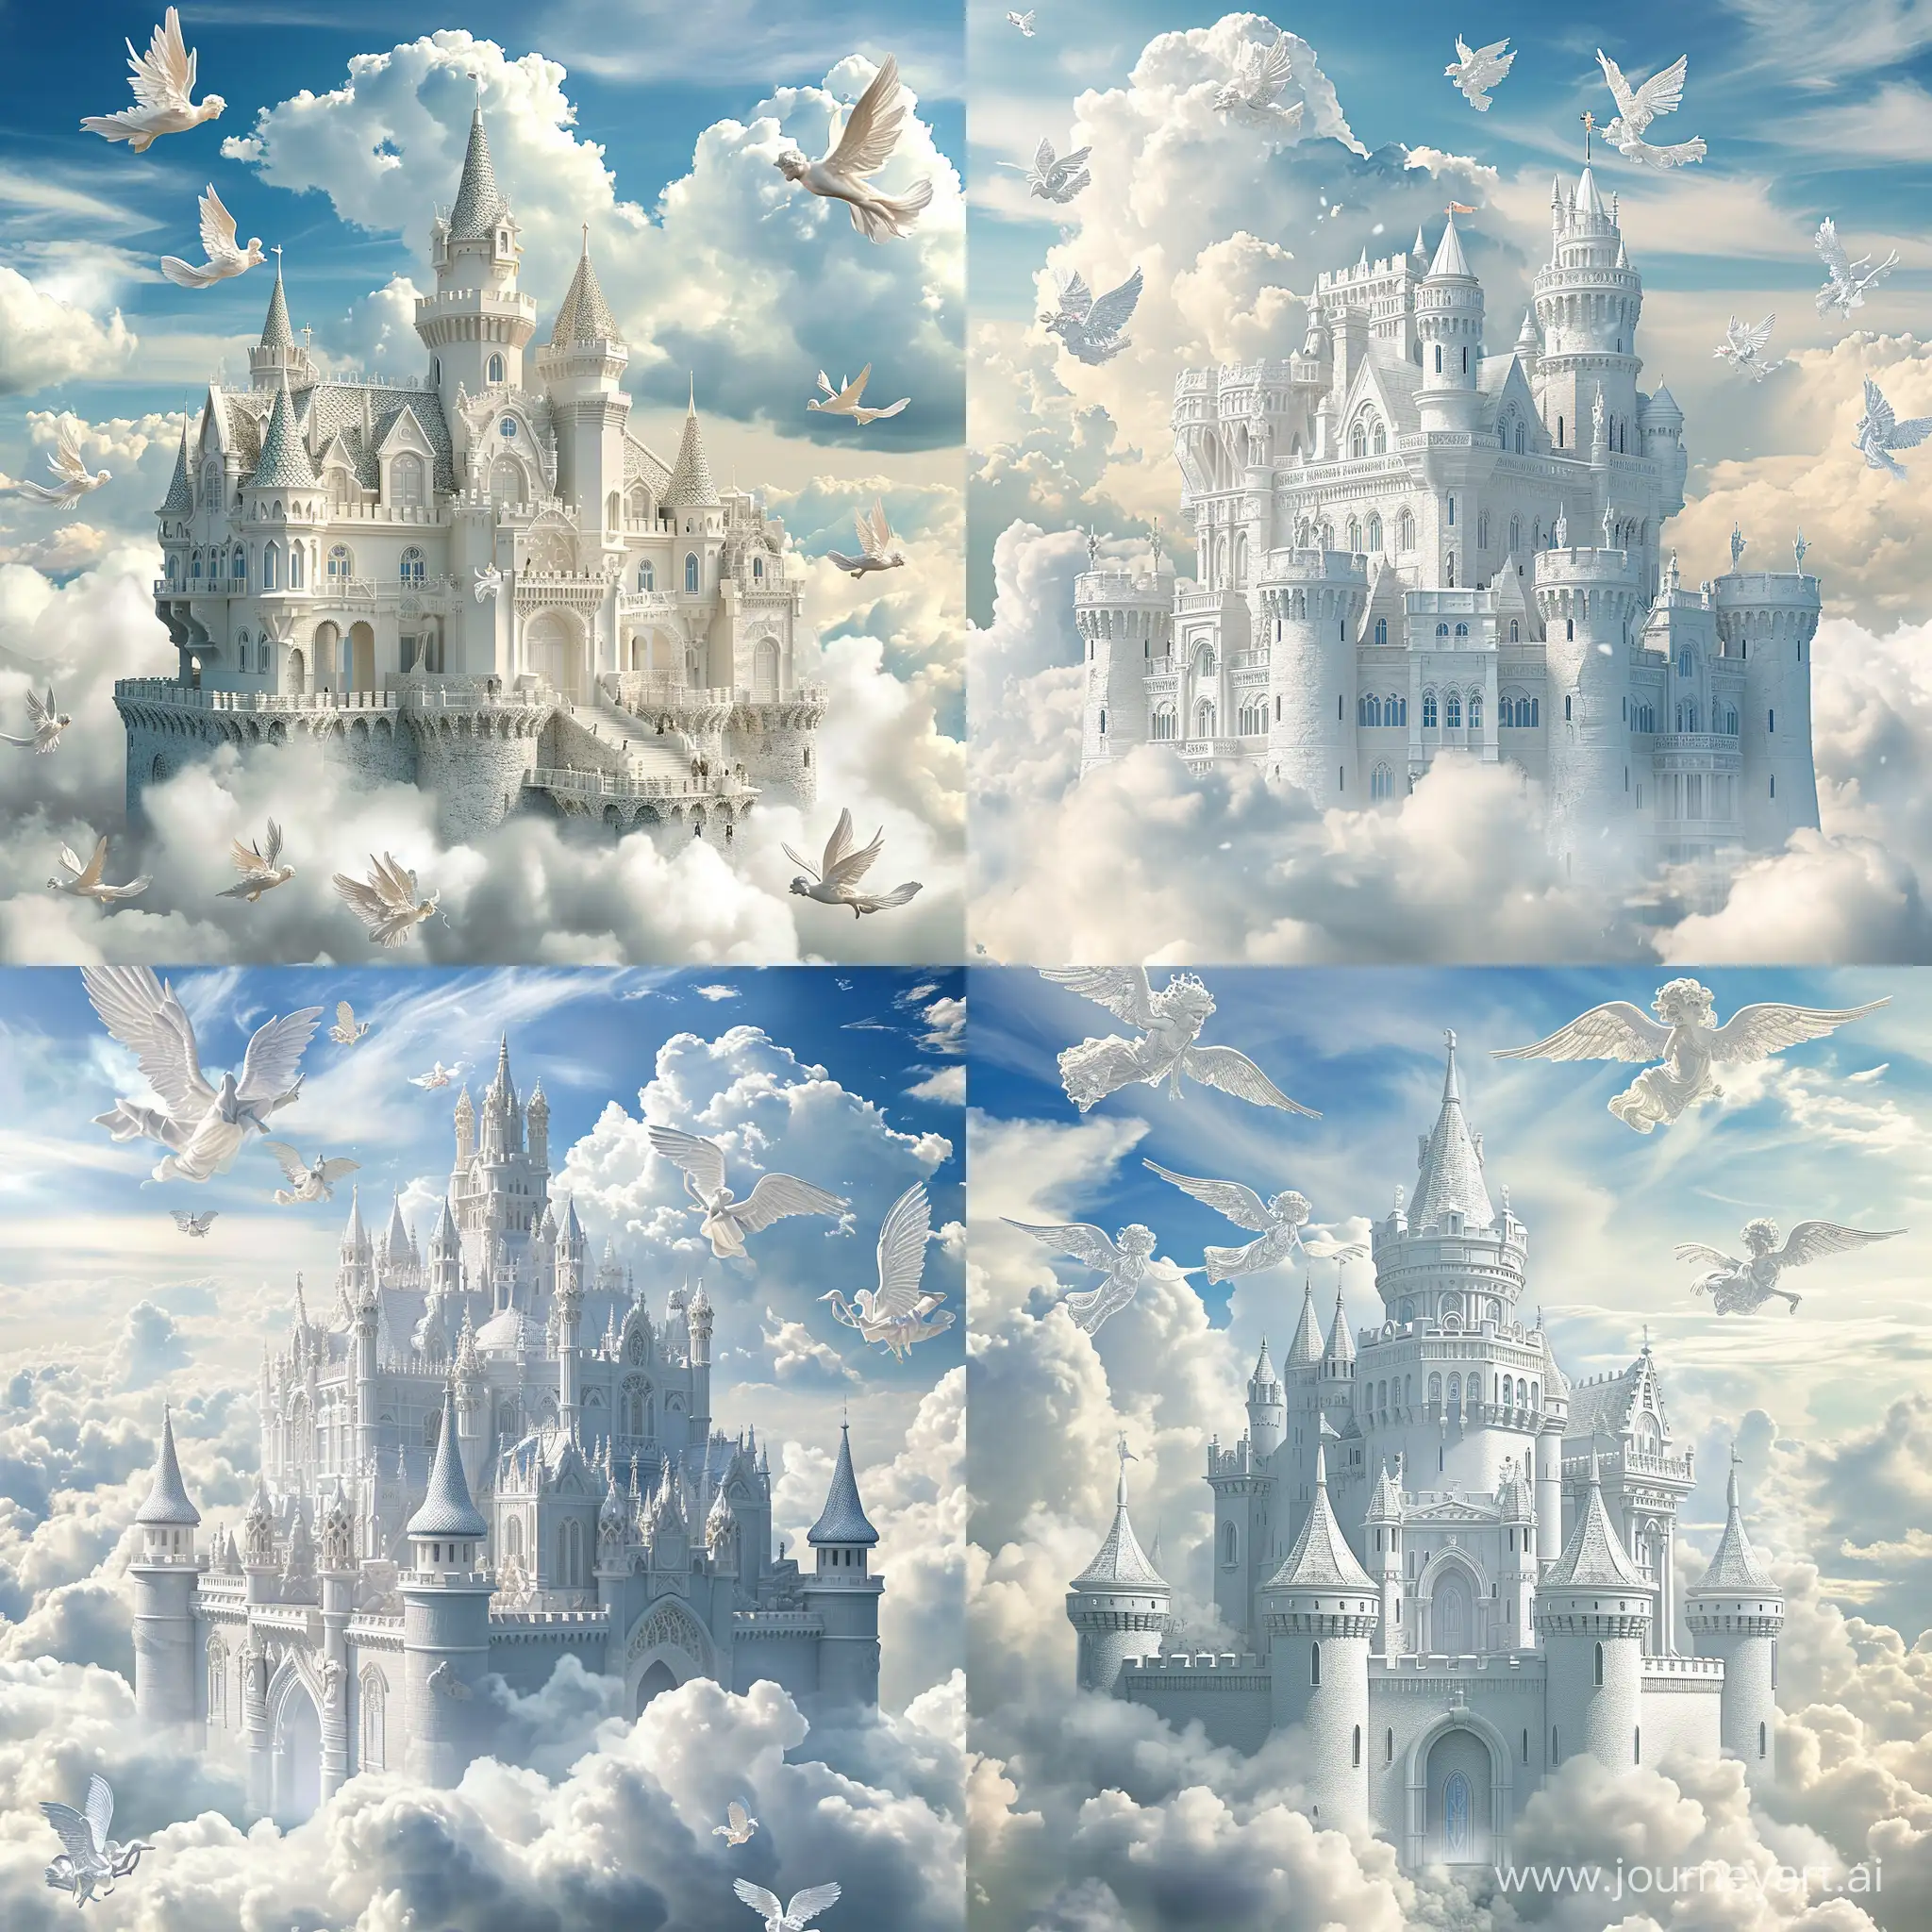 A castle beutiful white castle in the clouds close up with flying angels, angles flying around castle, high detailed, 